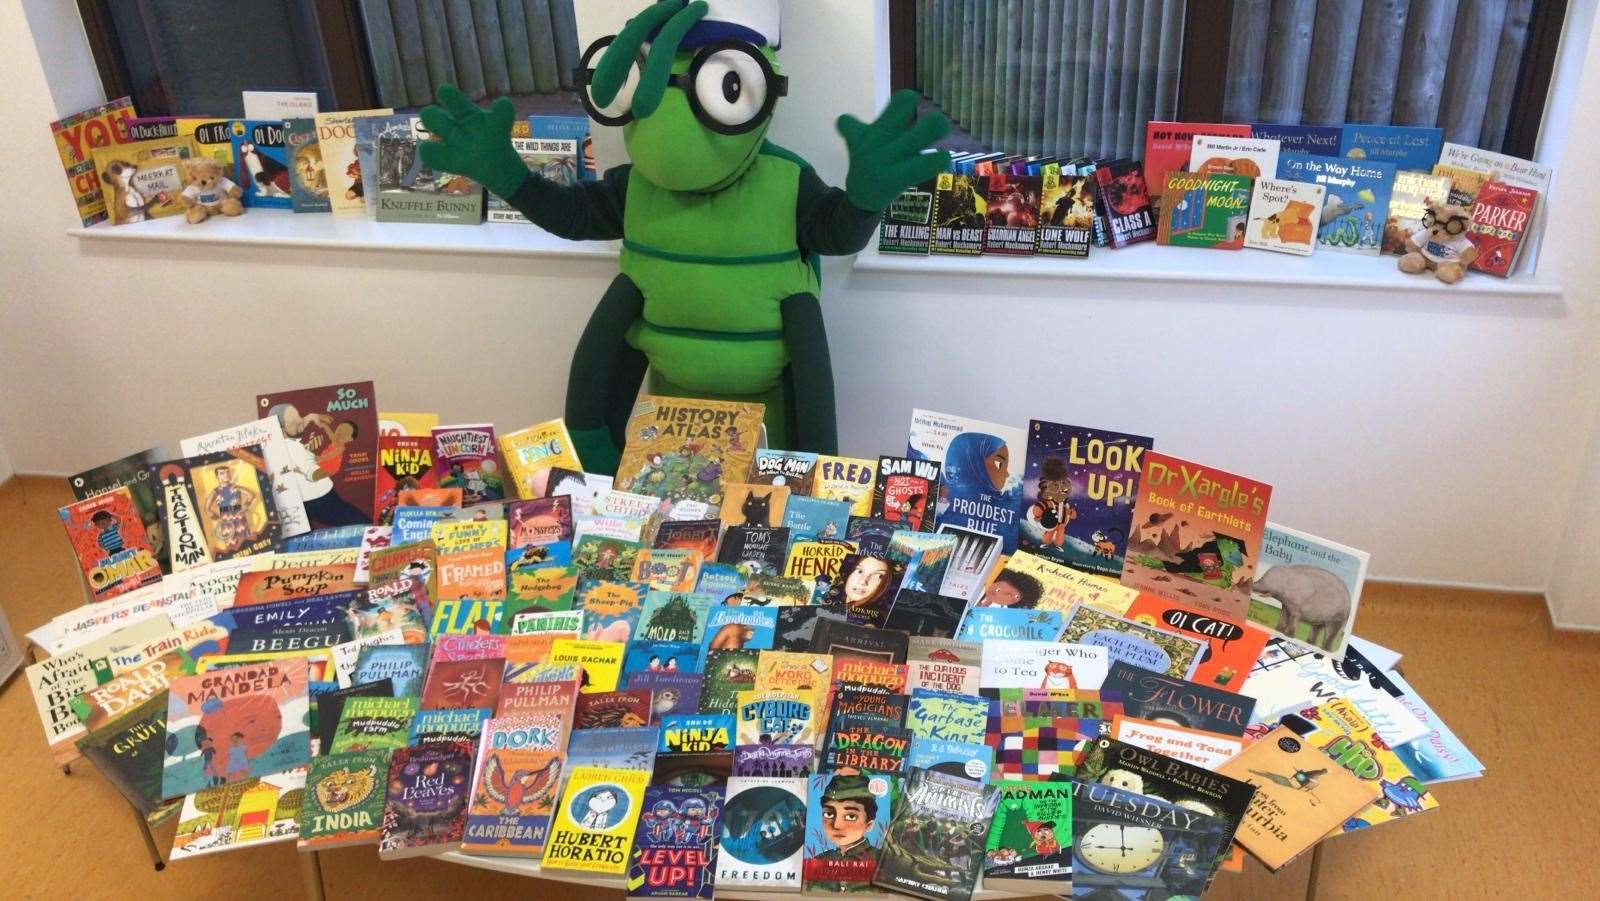 Buster with donated books